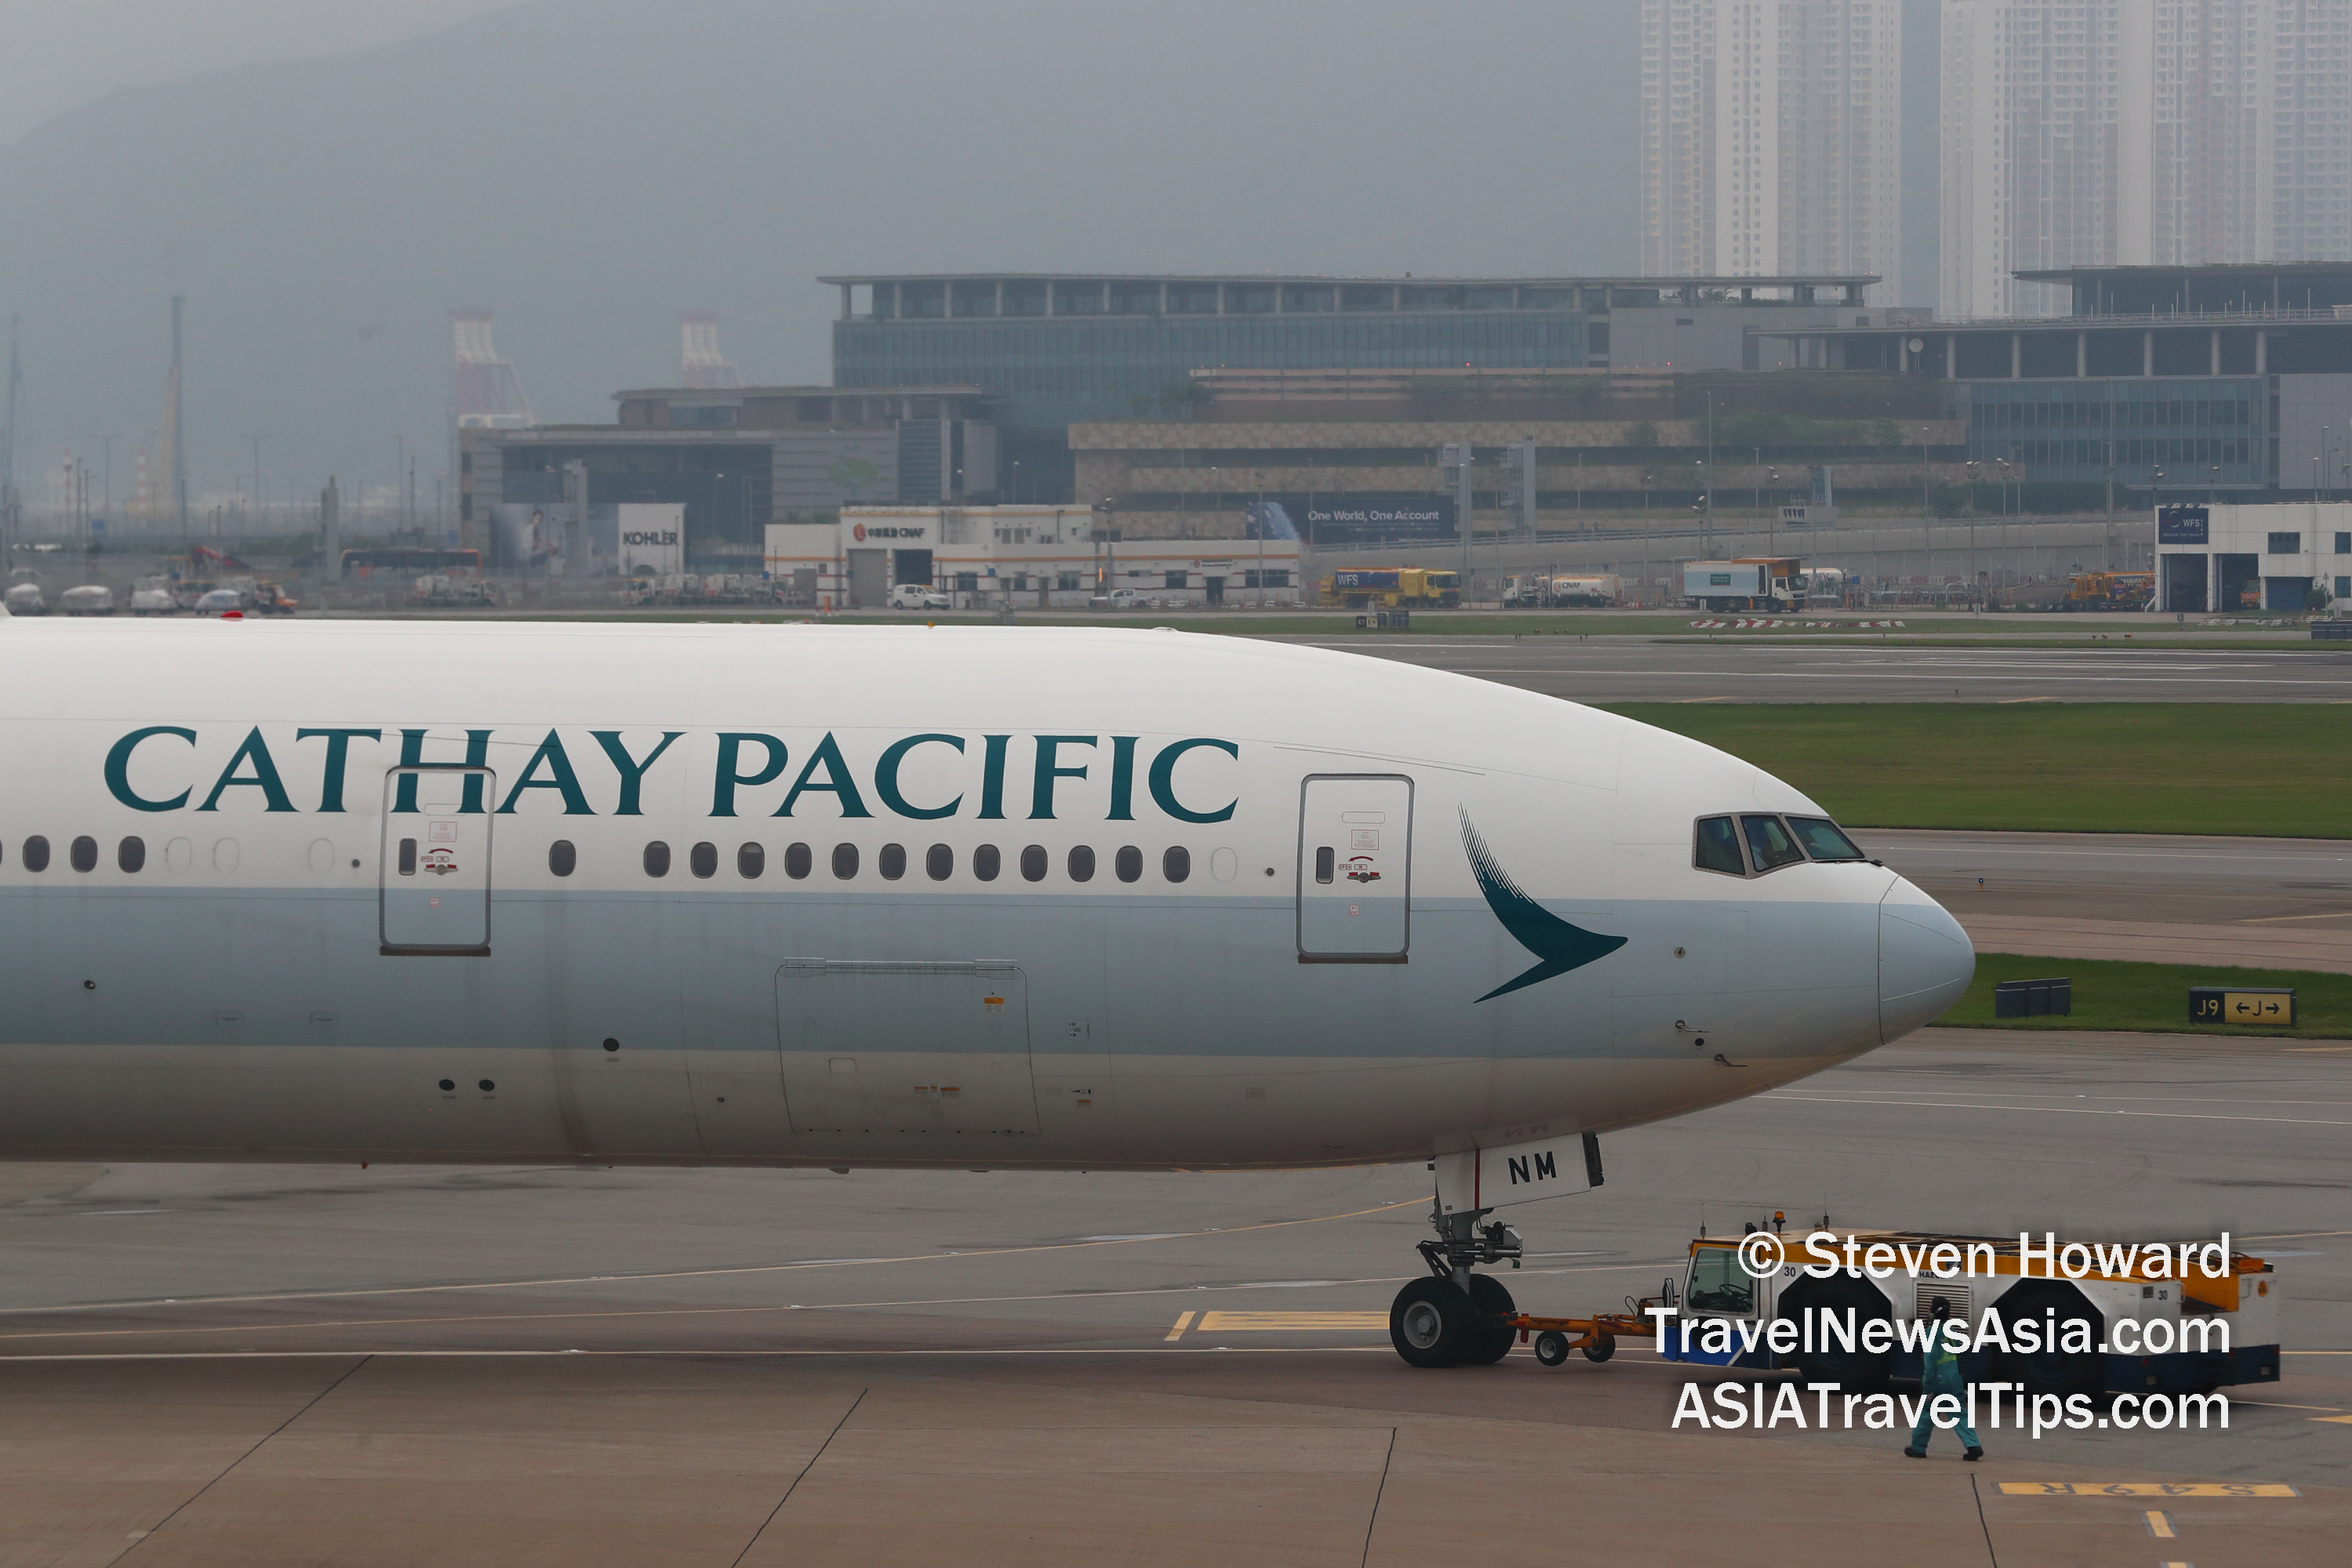 Cathay Pacific Boeing 777-300 reg: B-HNM. Picture by Steven Howard of TravelNewsAsia.com. Click to enlarge.